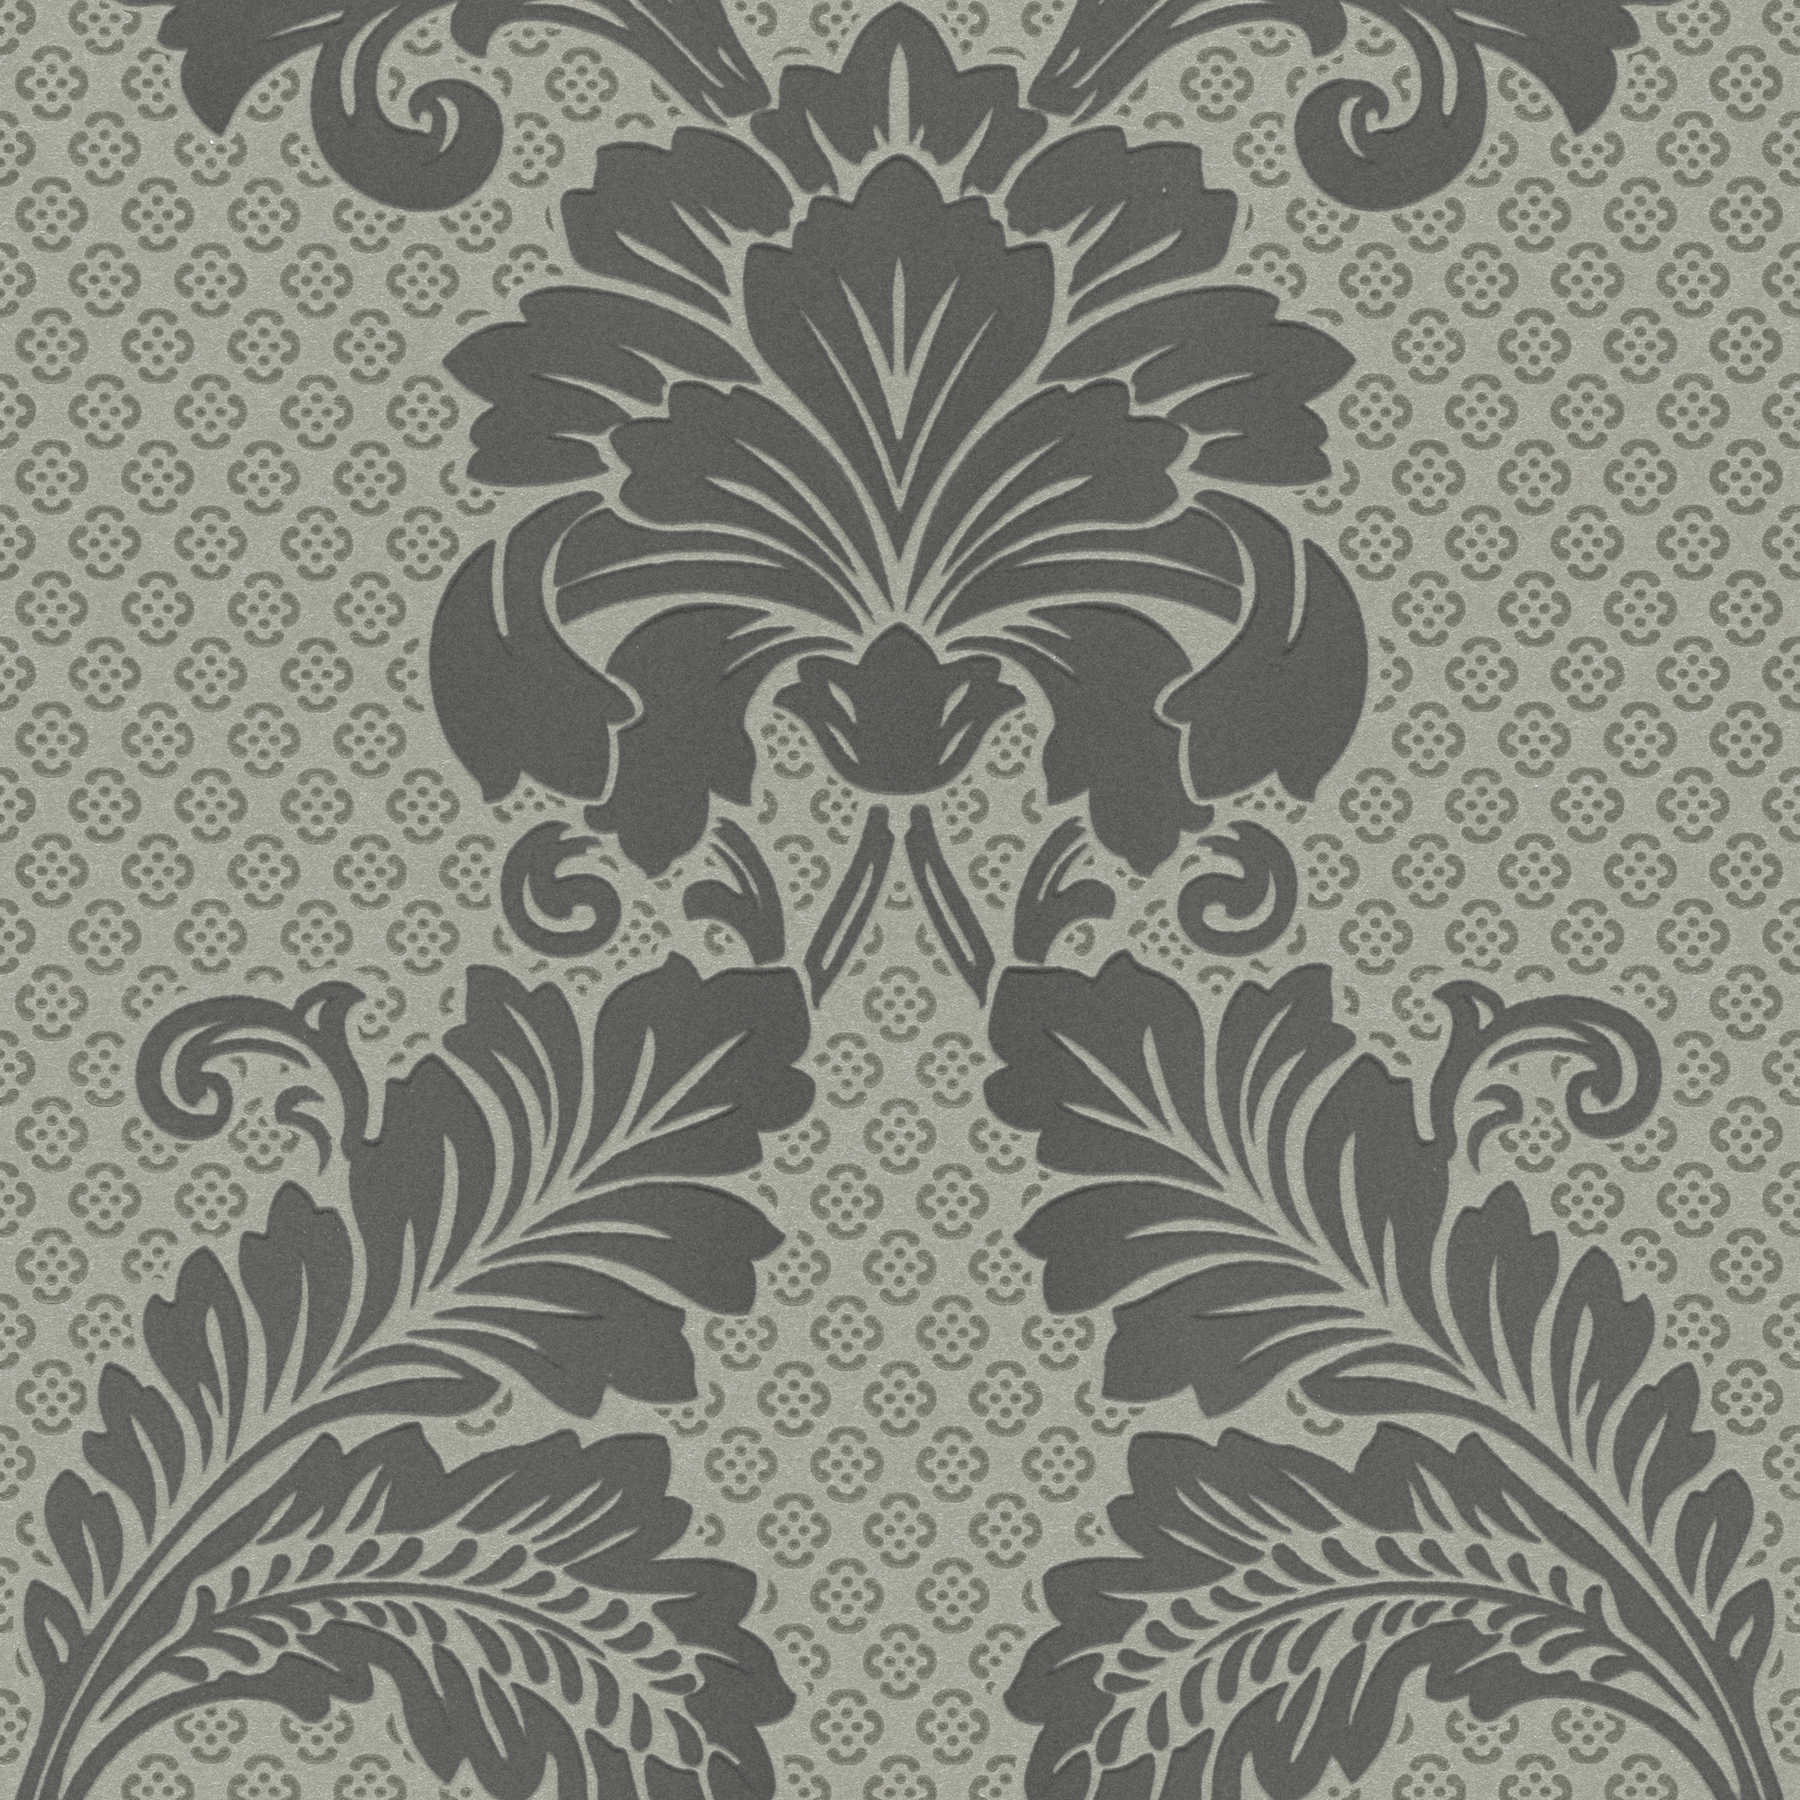 Patterned ornamental wallpaper with large floral motif - grey, bronze
